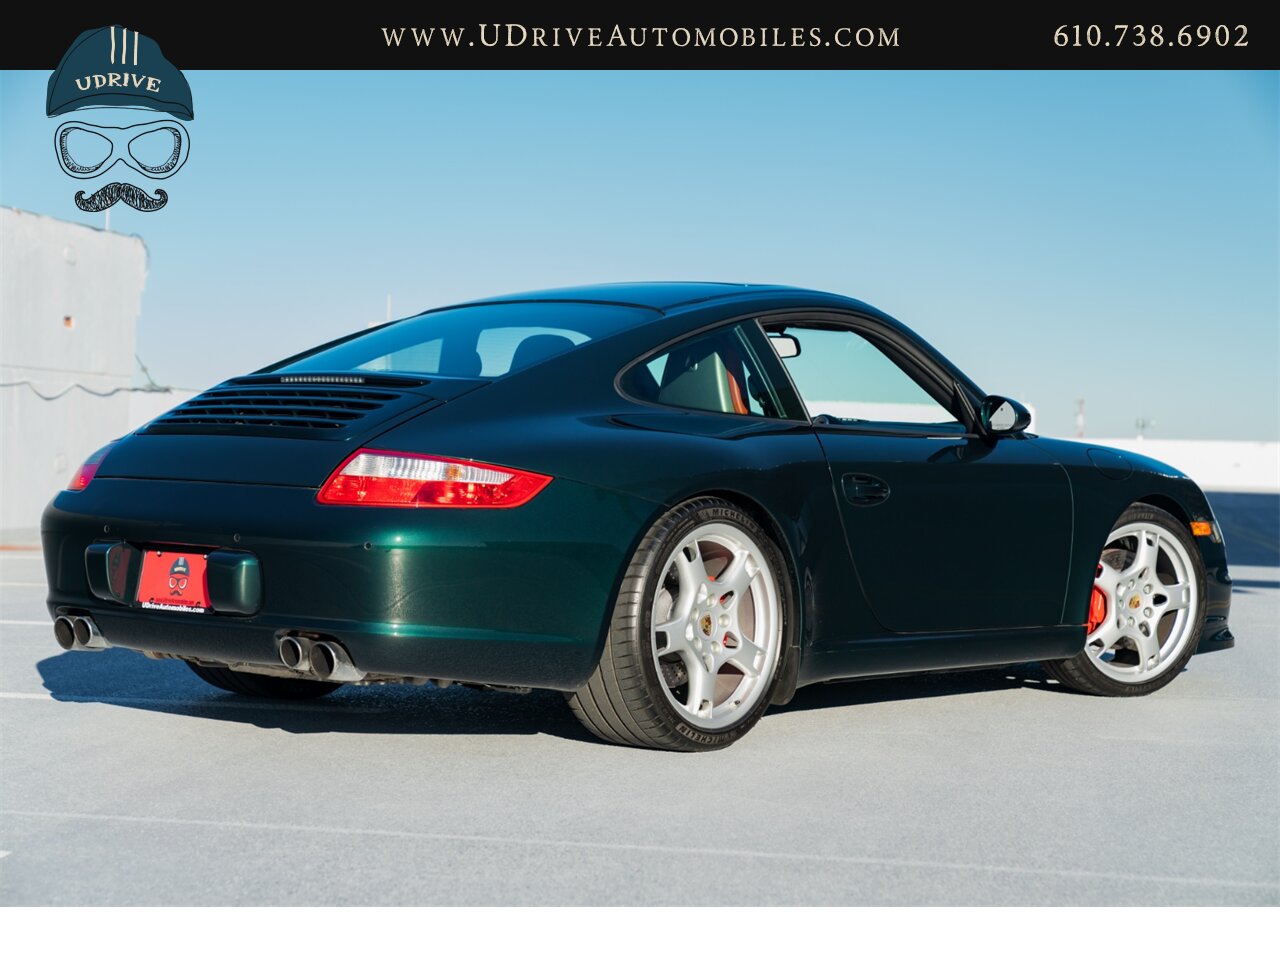 2007 Porsche 911 Carrera S 6Spd 997S RARE X51 Power Kit 381hp  1 of a Kind Forest Green over Blk/Terracotta Chrono Adap Sport Sts $113k MSRP - Photo 3 - West Chester, PA 19382